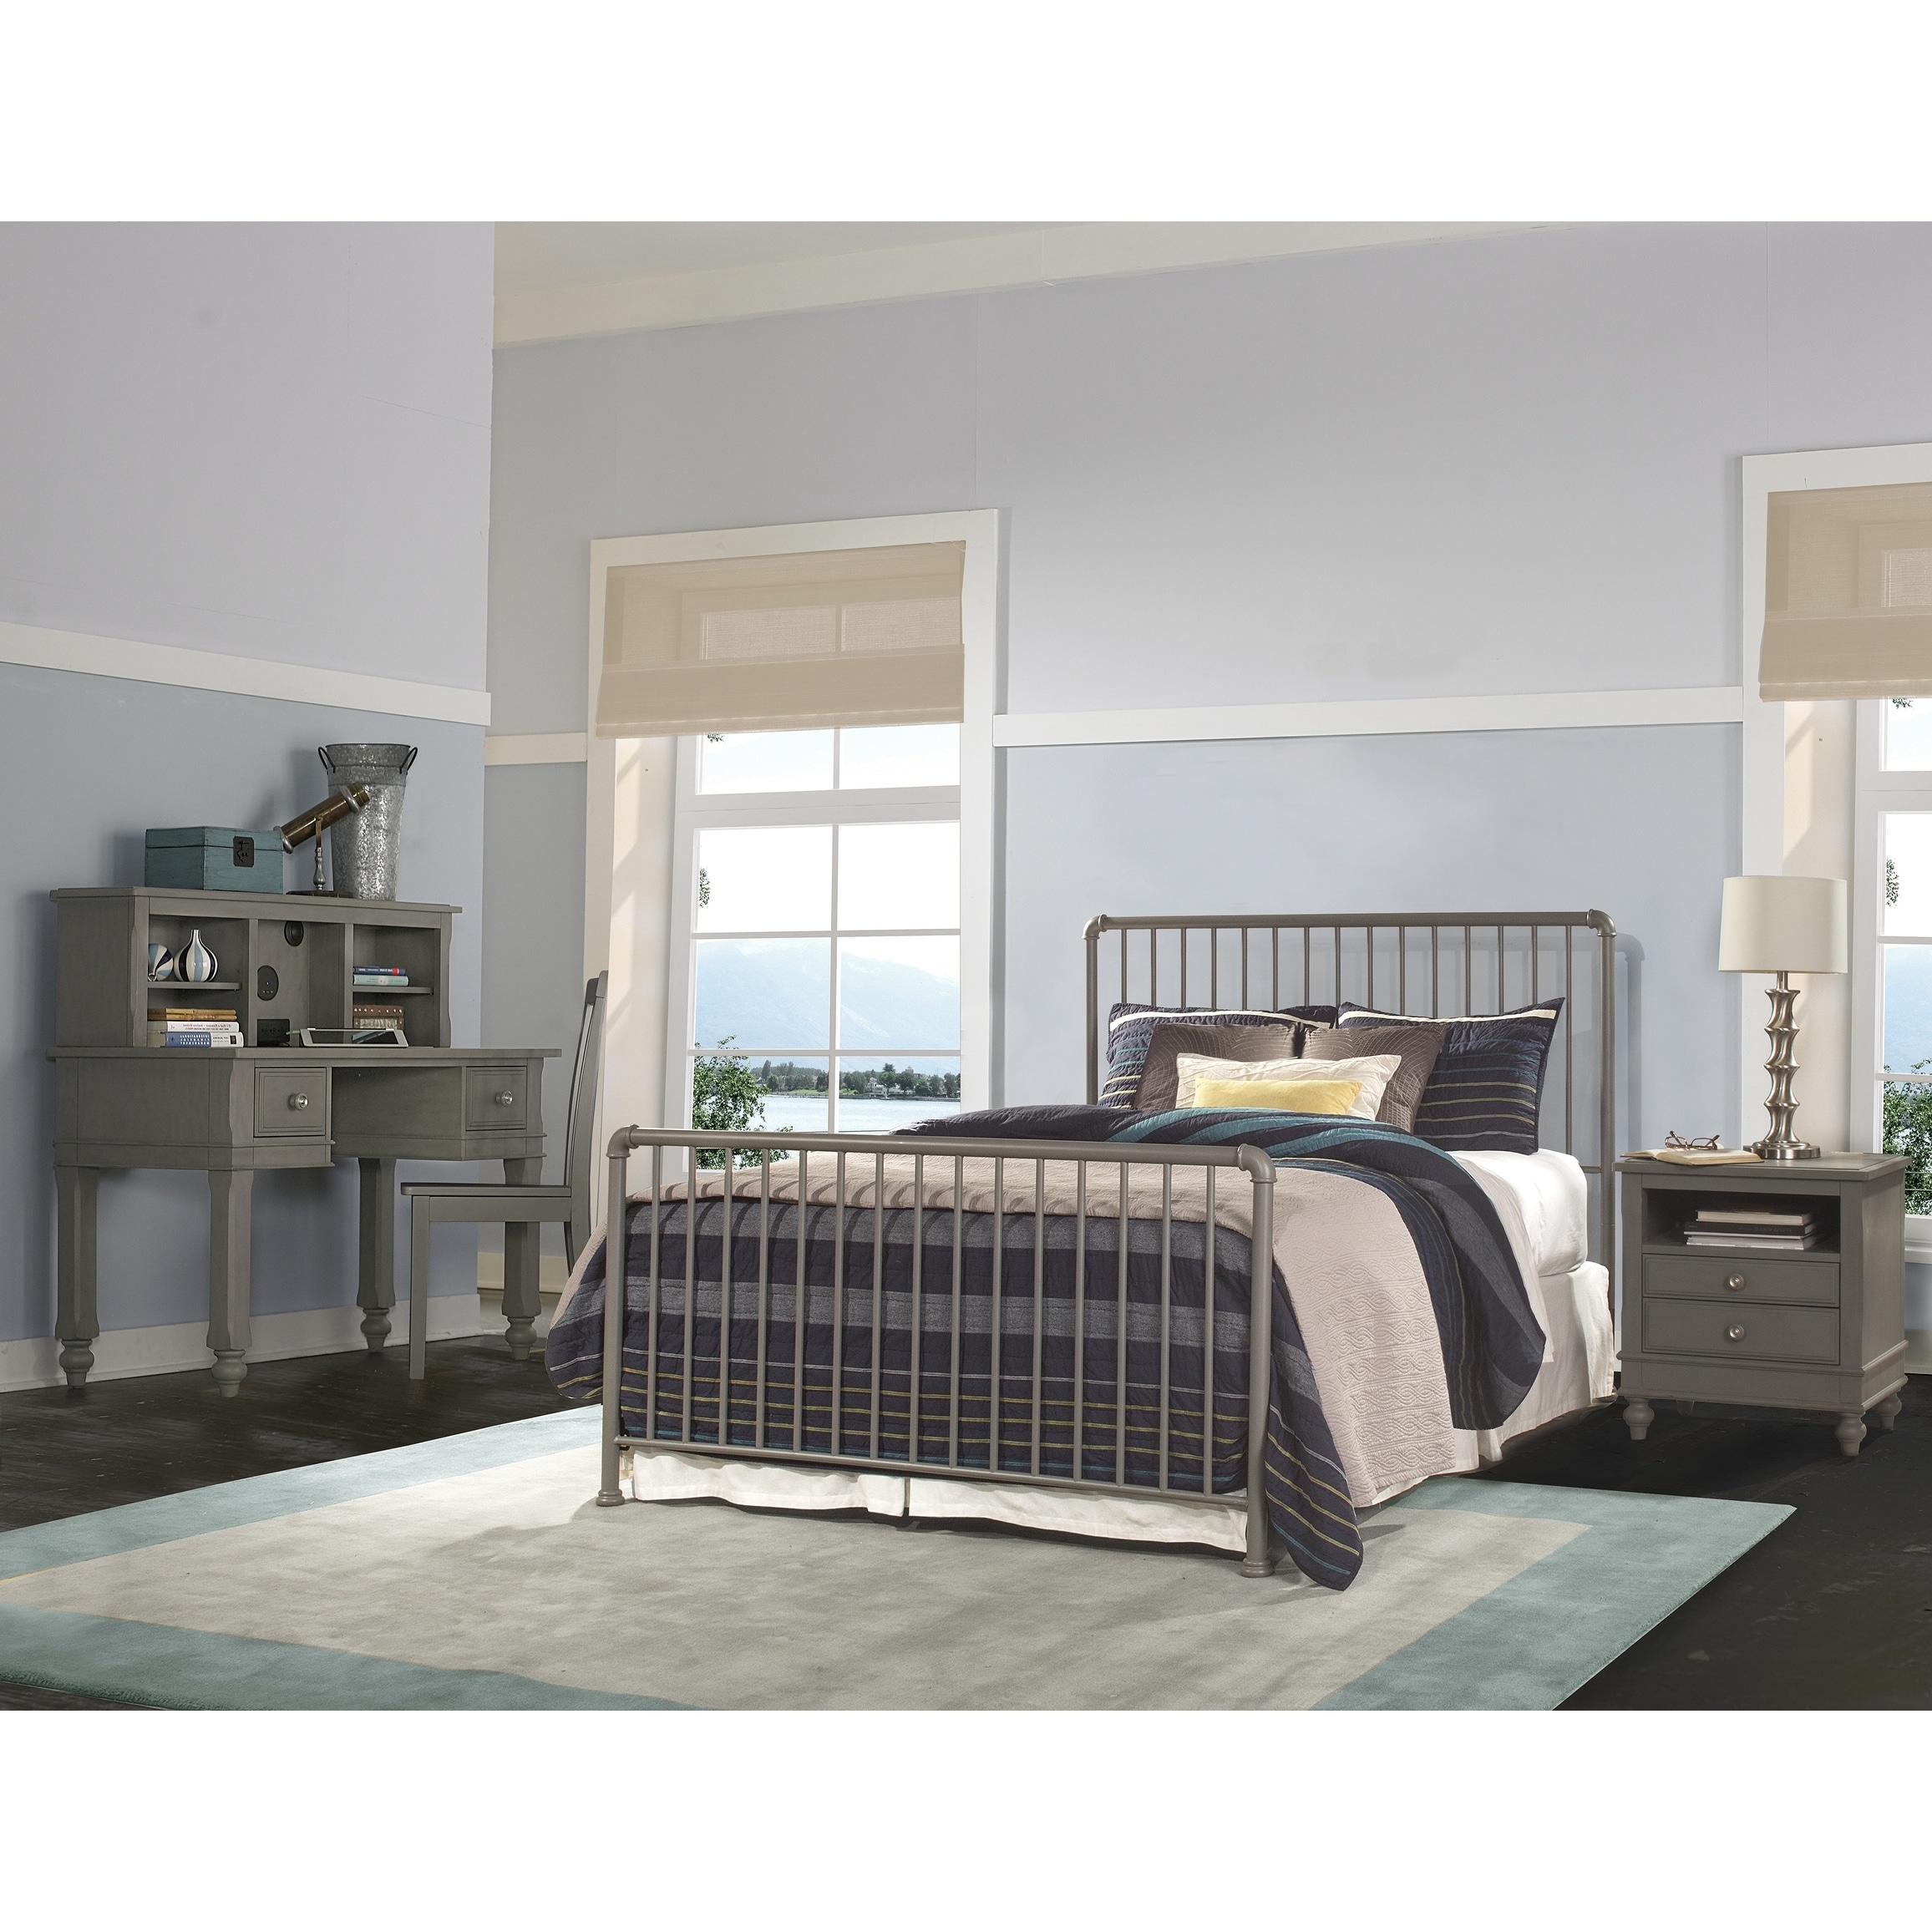 Hillsdale Brandi Queen Bed Set Bed Frame Included On Sale Overstock 19967504